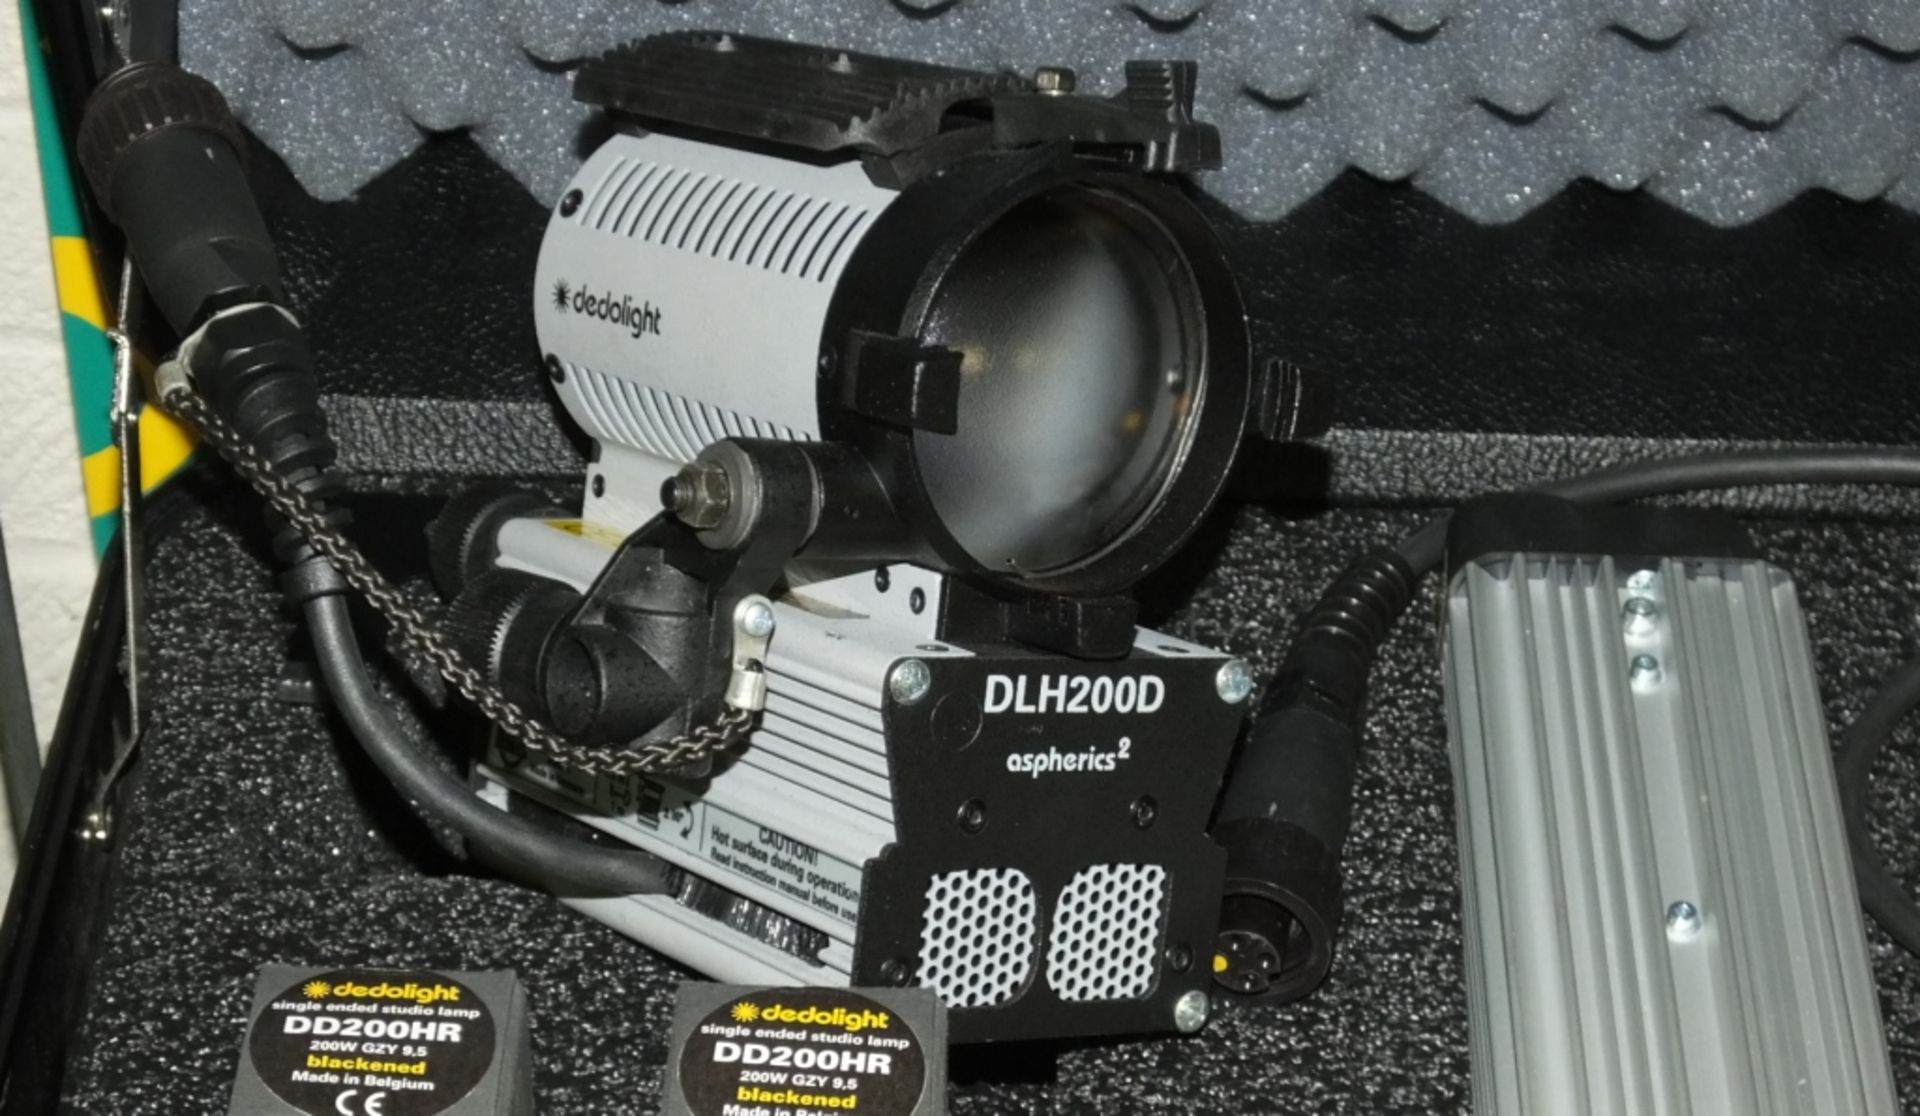 Dedolight DLH200D - Lighting Kit In A Case & Cable - Image 2 of 4